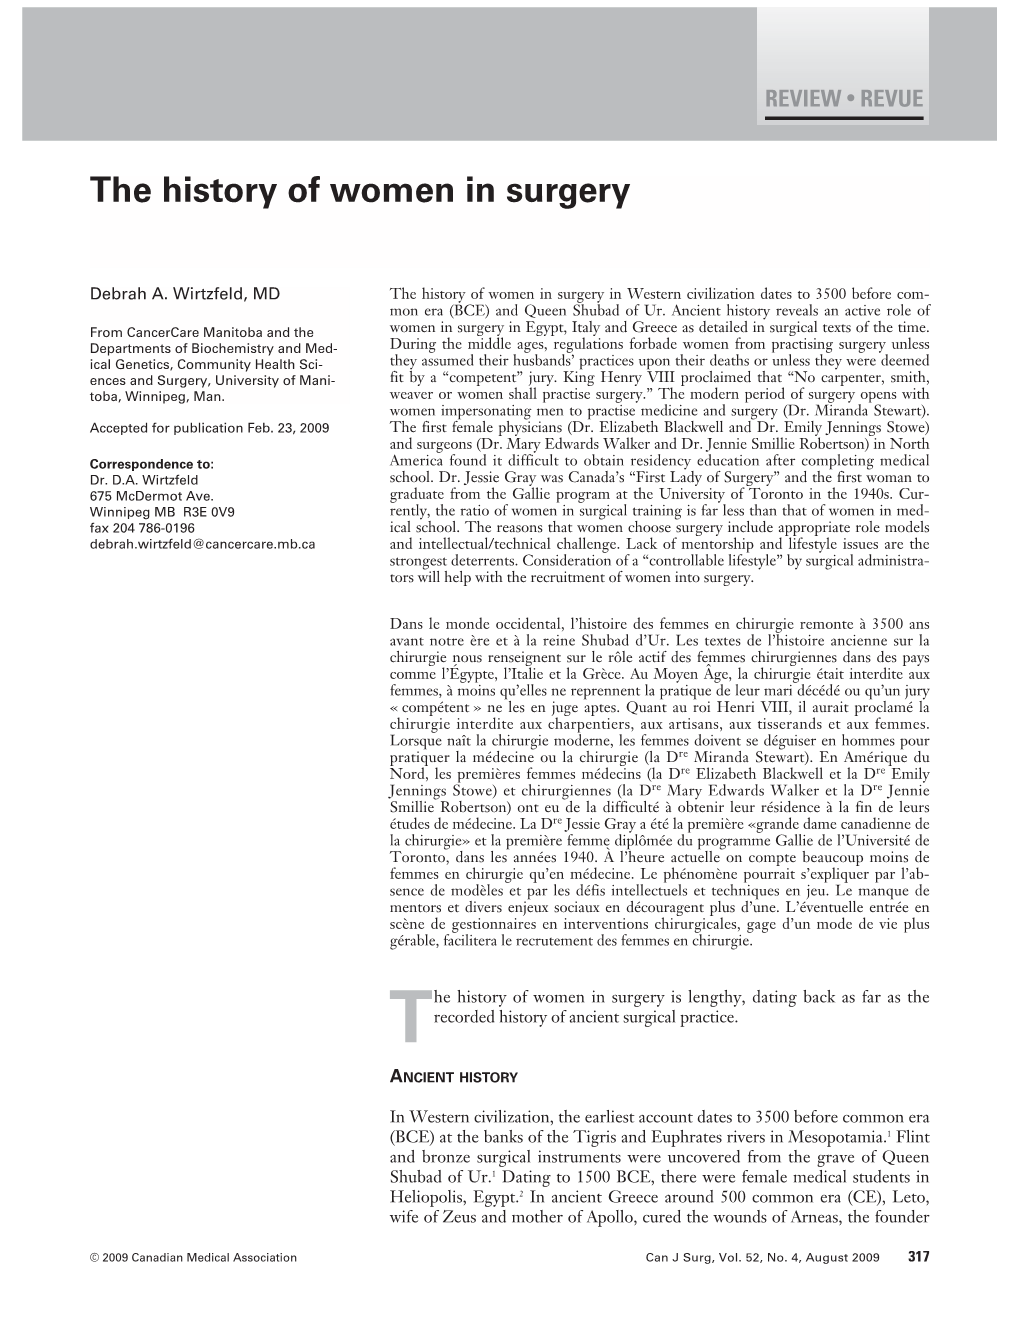 The History of Women in Surgery